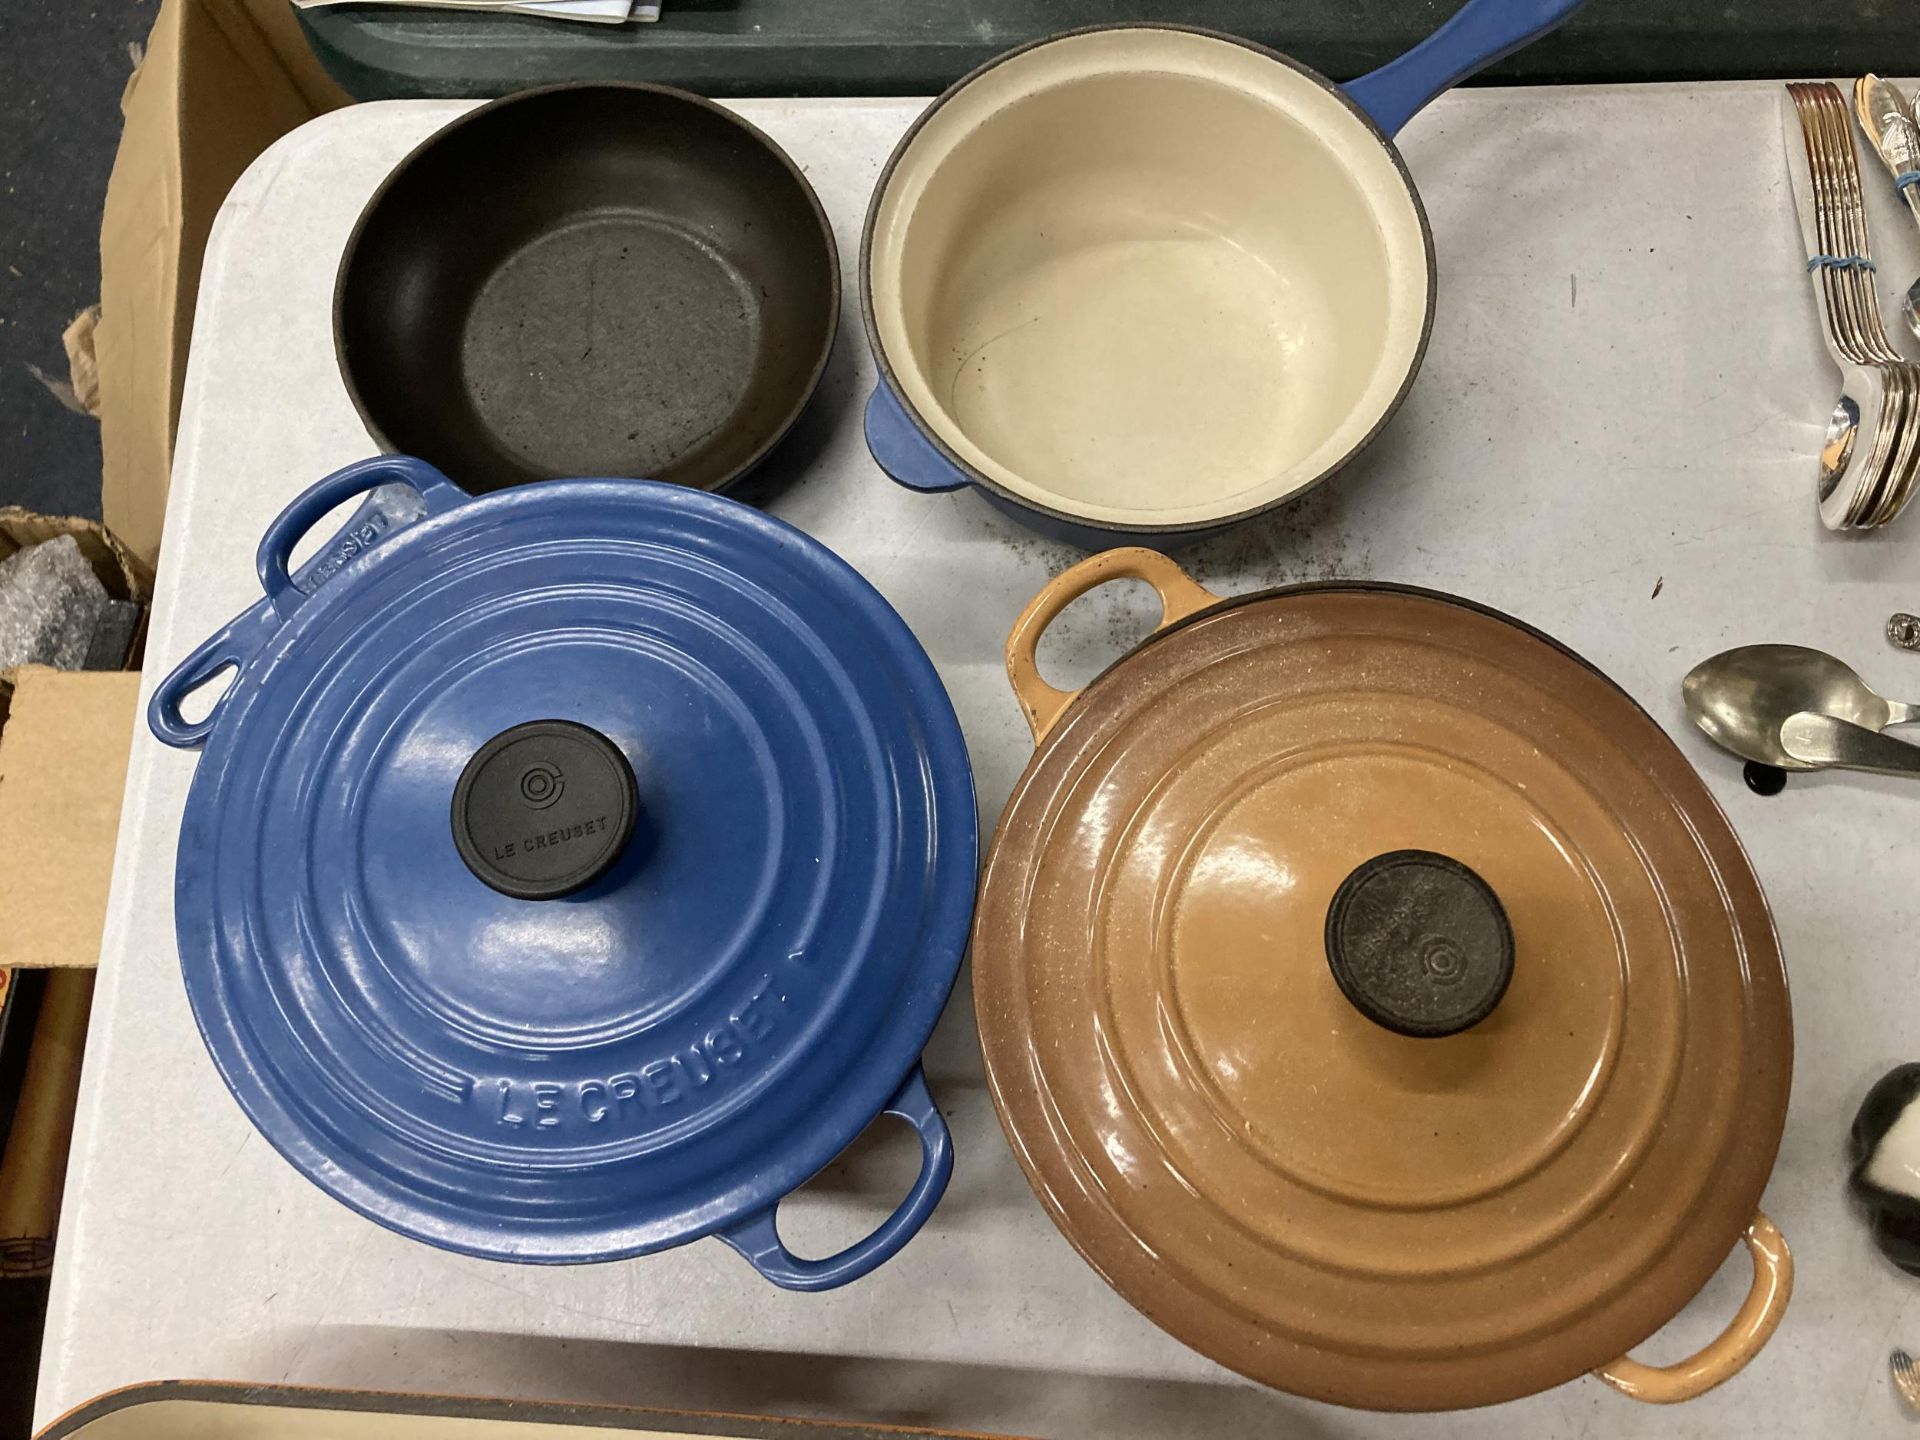 FIVE PIECES OF LE CREUSET COOKWARE TO INCLUDE LIDDED CASSEROLE DISHES, A FLAN DISH AND PANS - Image 2 of 3